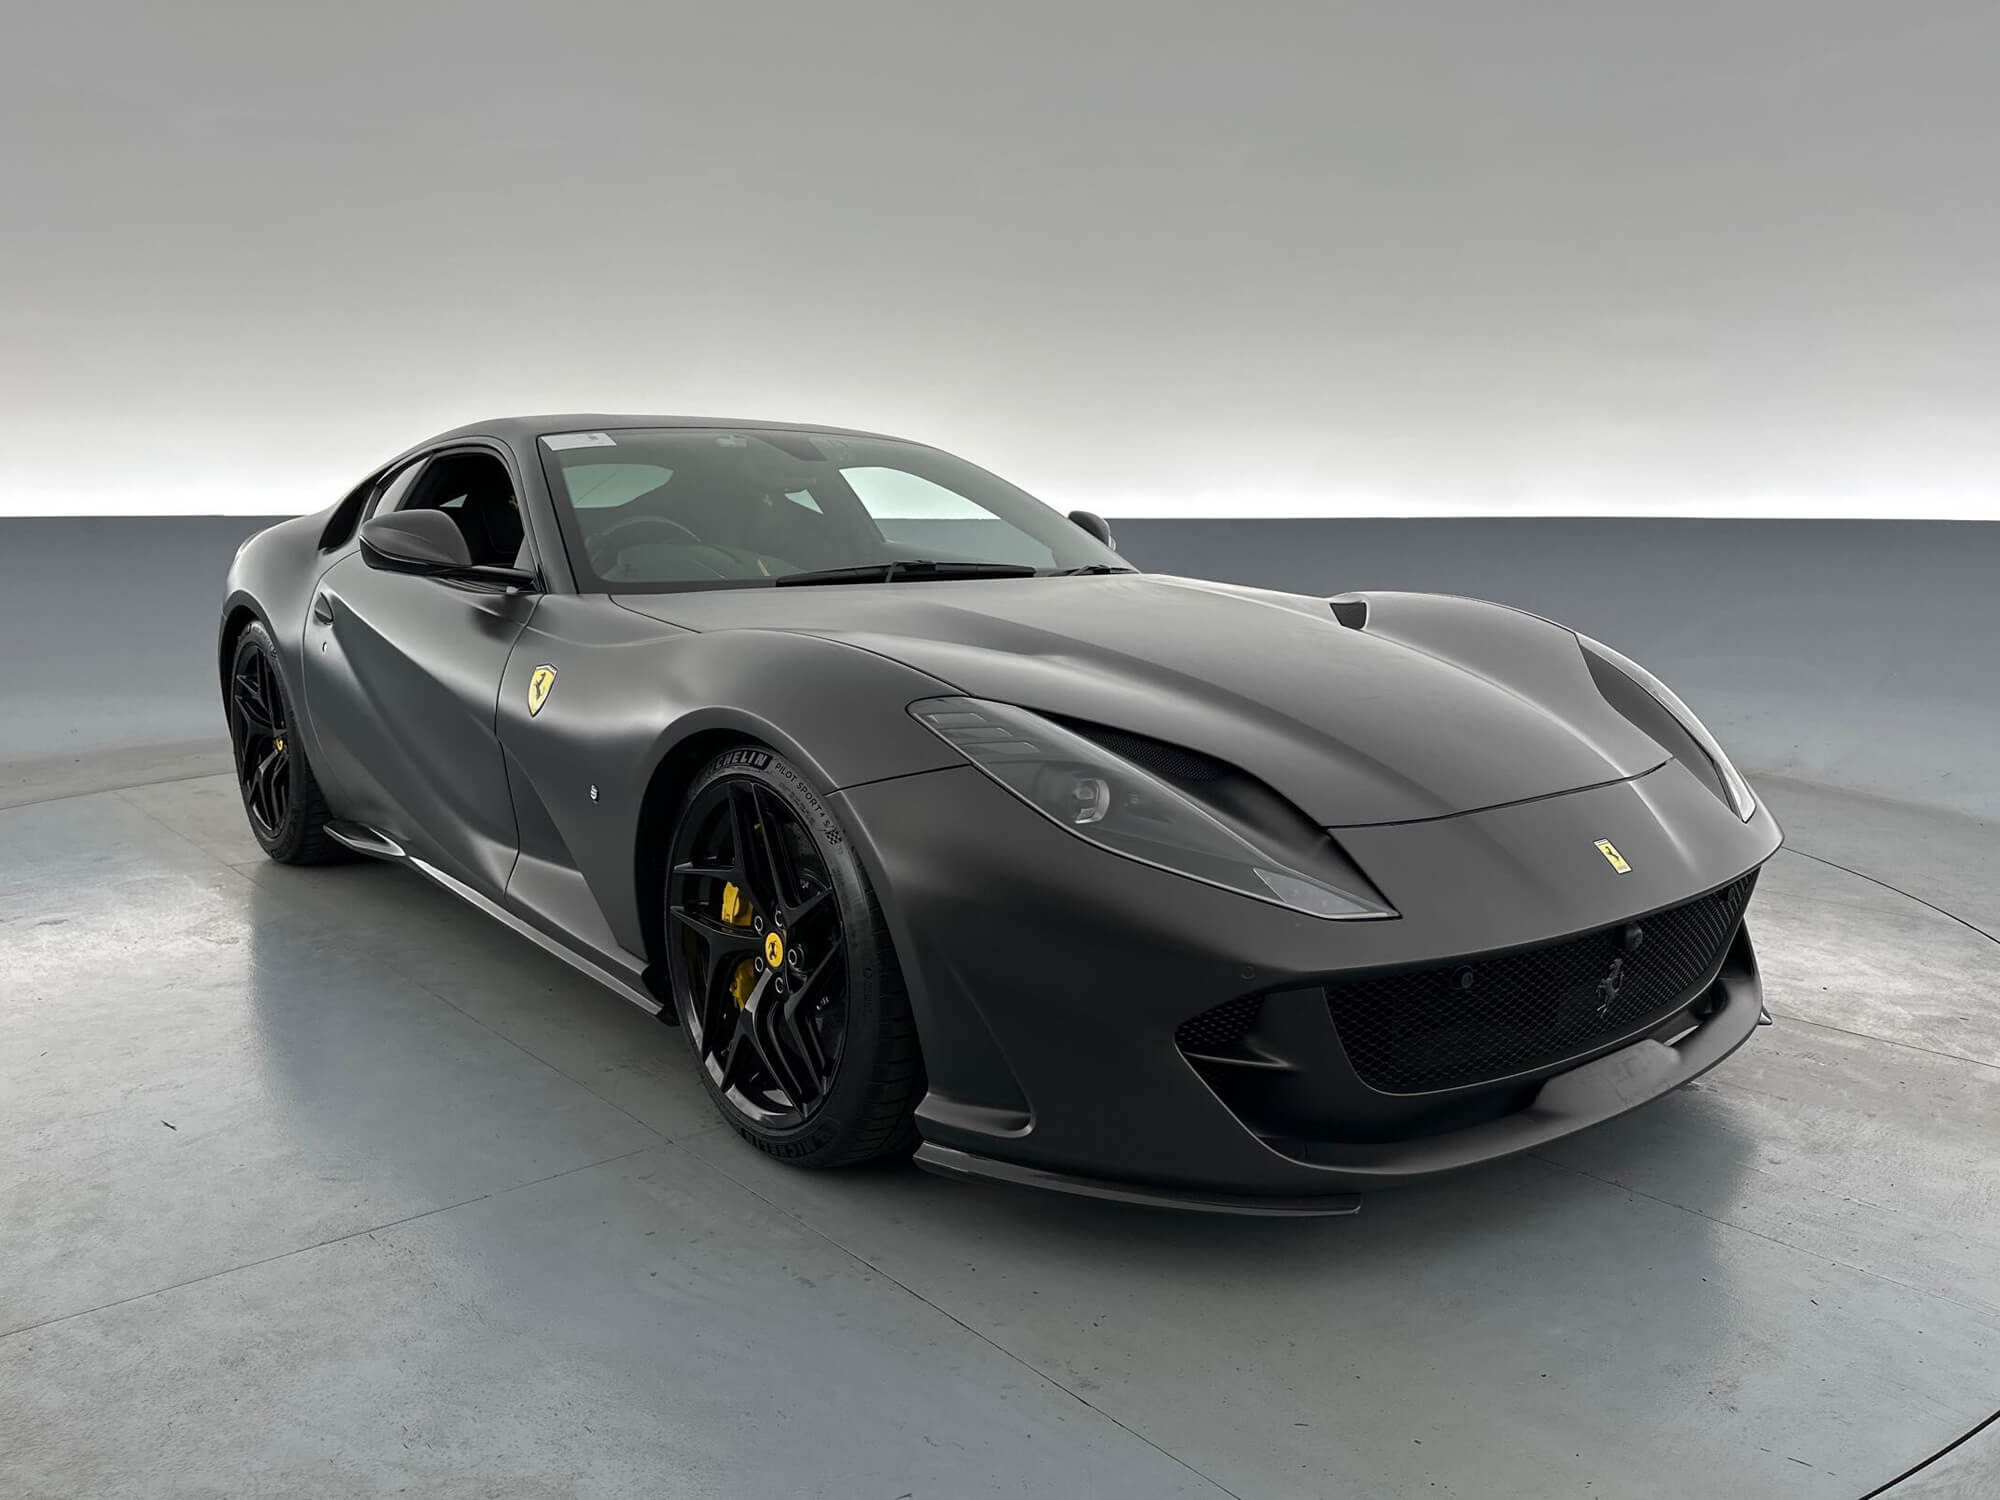 View a grey 2018 Ferrari 812 Superfast F152M available via auction.